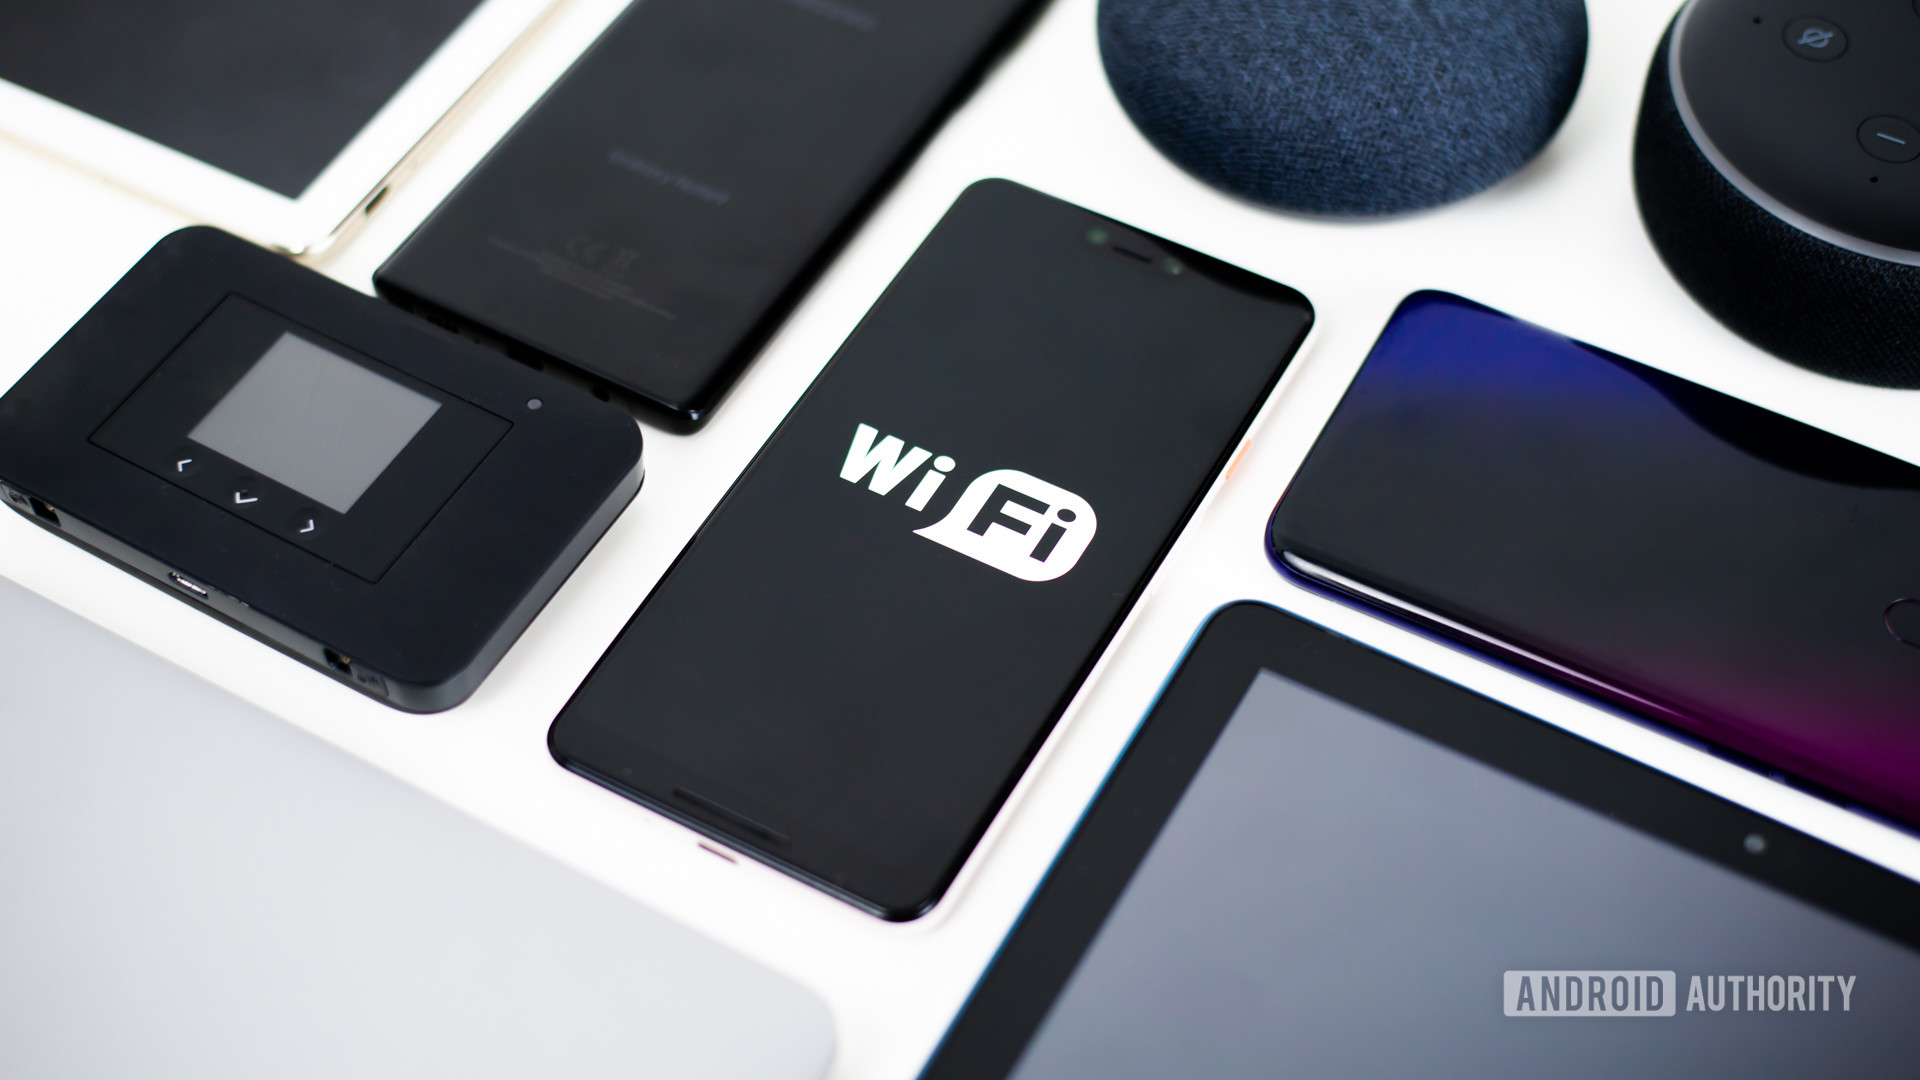 Wi Fi devices stock image showing various Wi-Fi devices like smartphones and tablets